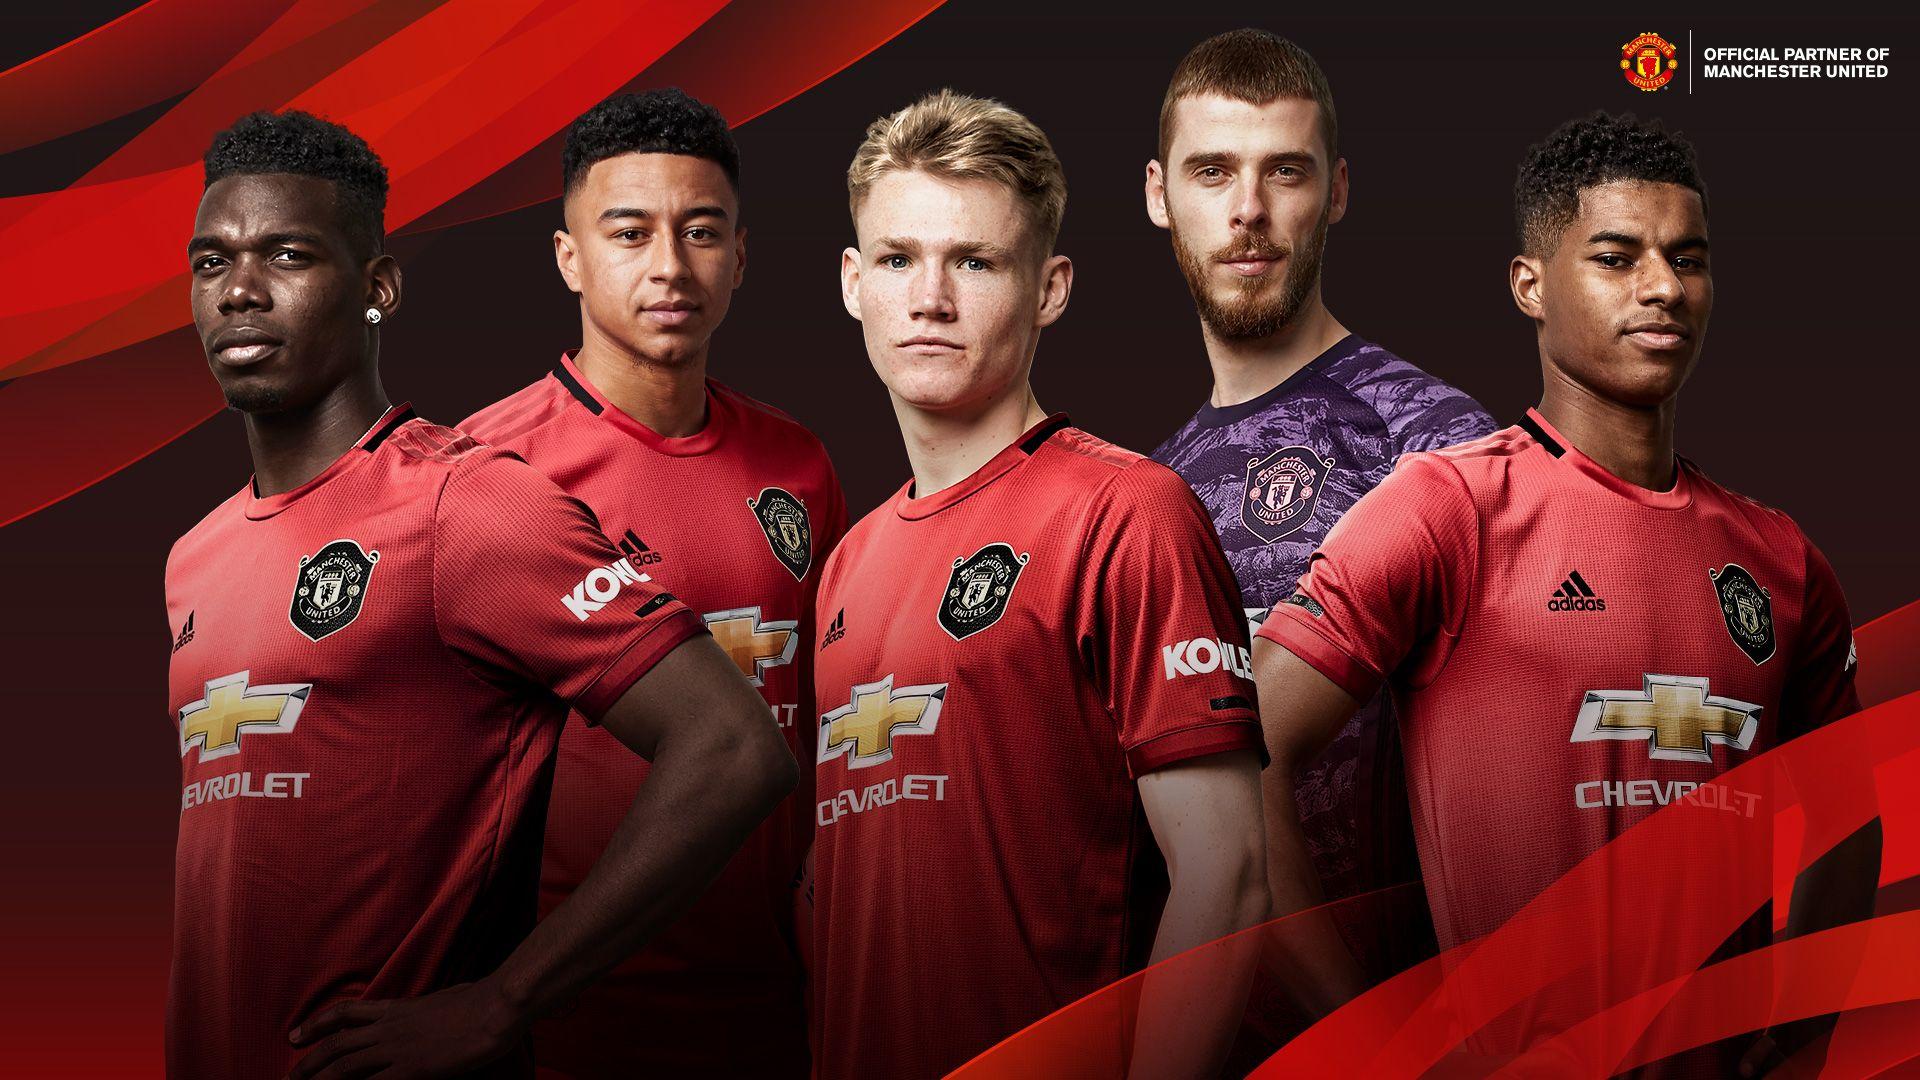 1920x1080 Manchester United HD Wallpaper Download - The Football Lovers